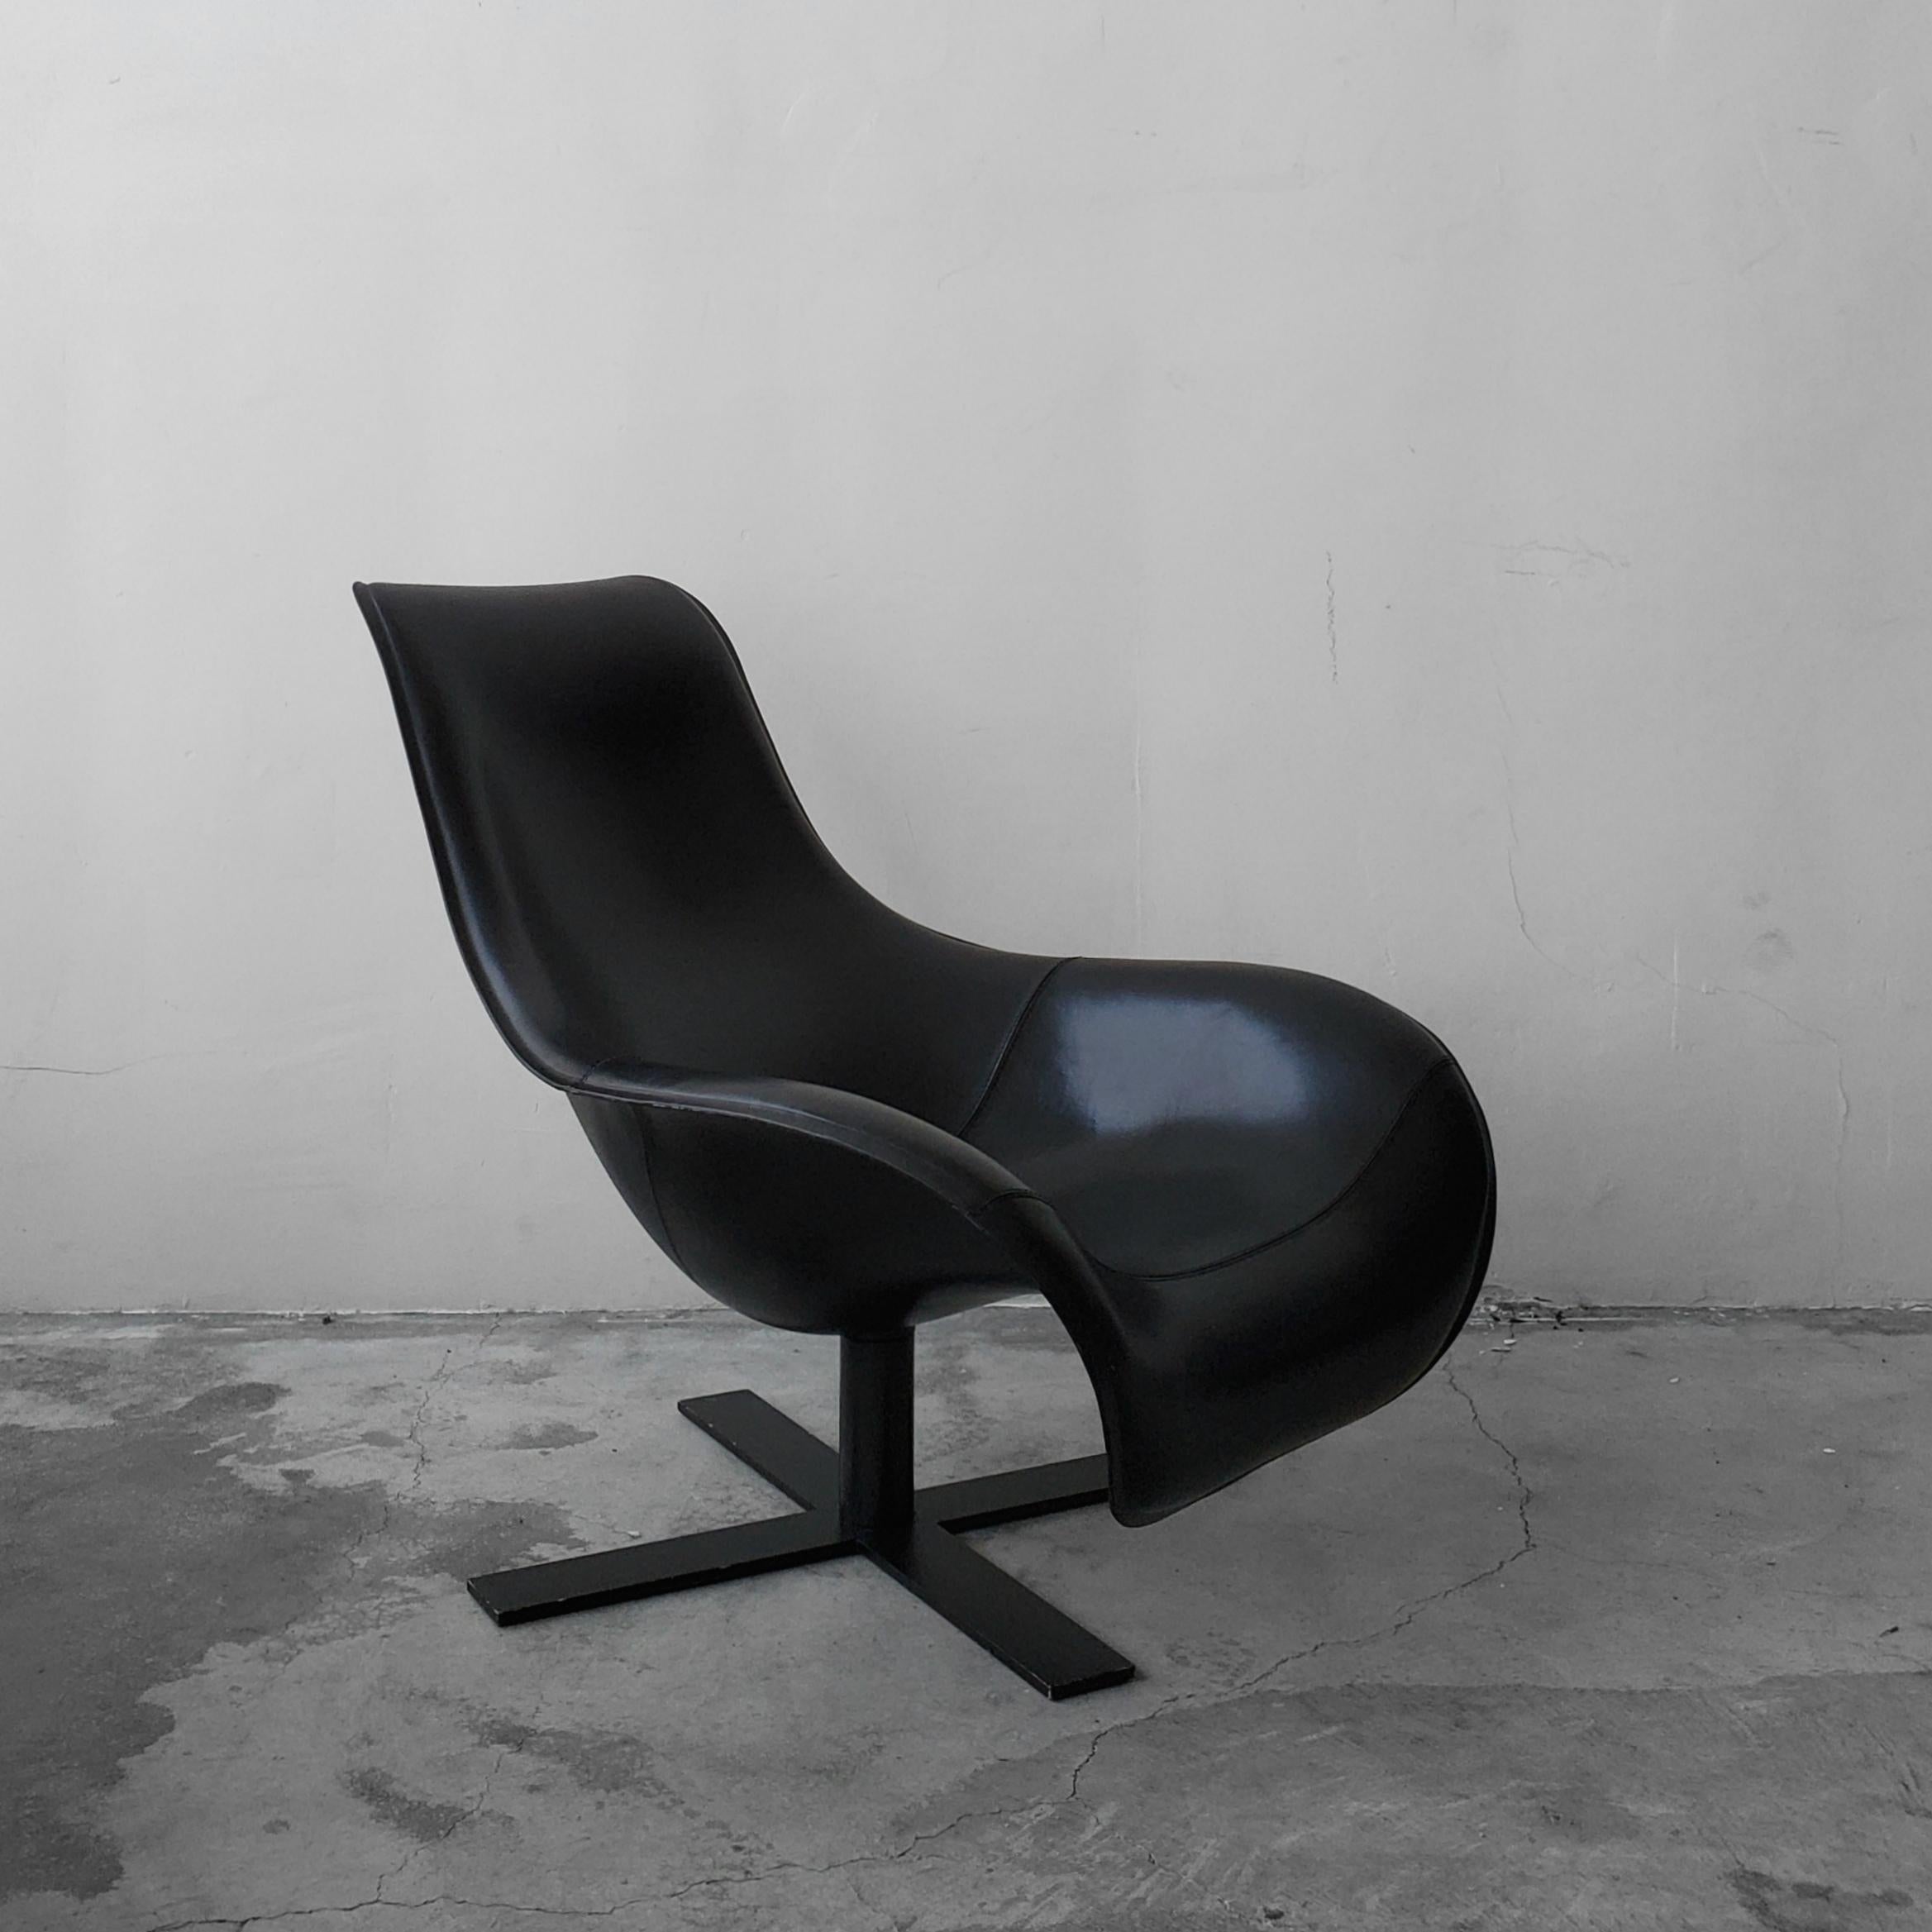 An all-black, B & B Italia Mart swivel armchair in thermoformed black leather design by Antonio Citterio. The chair that just looks like relaxation. A modern piece, yet Classic enough to mesh with all decors.

Chair is in excellent condition